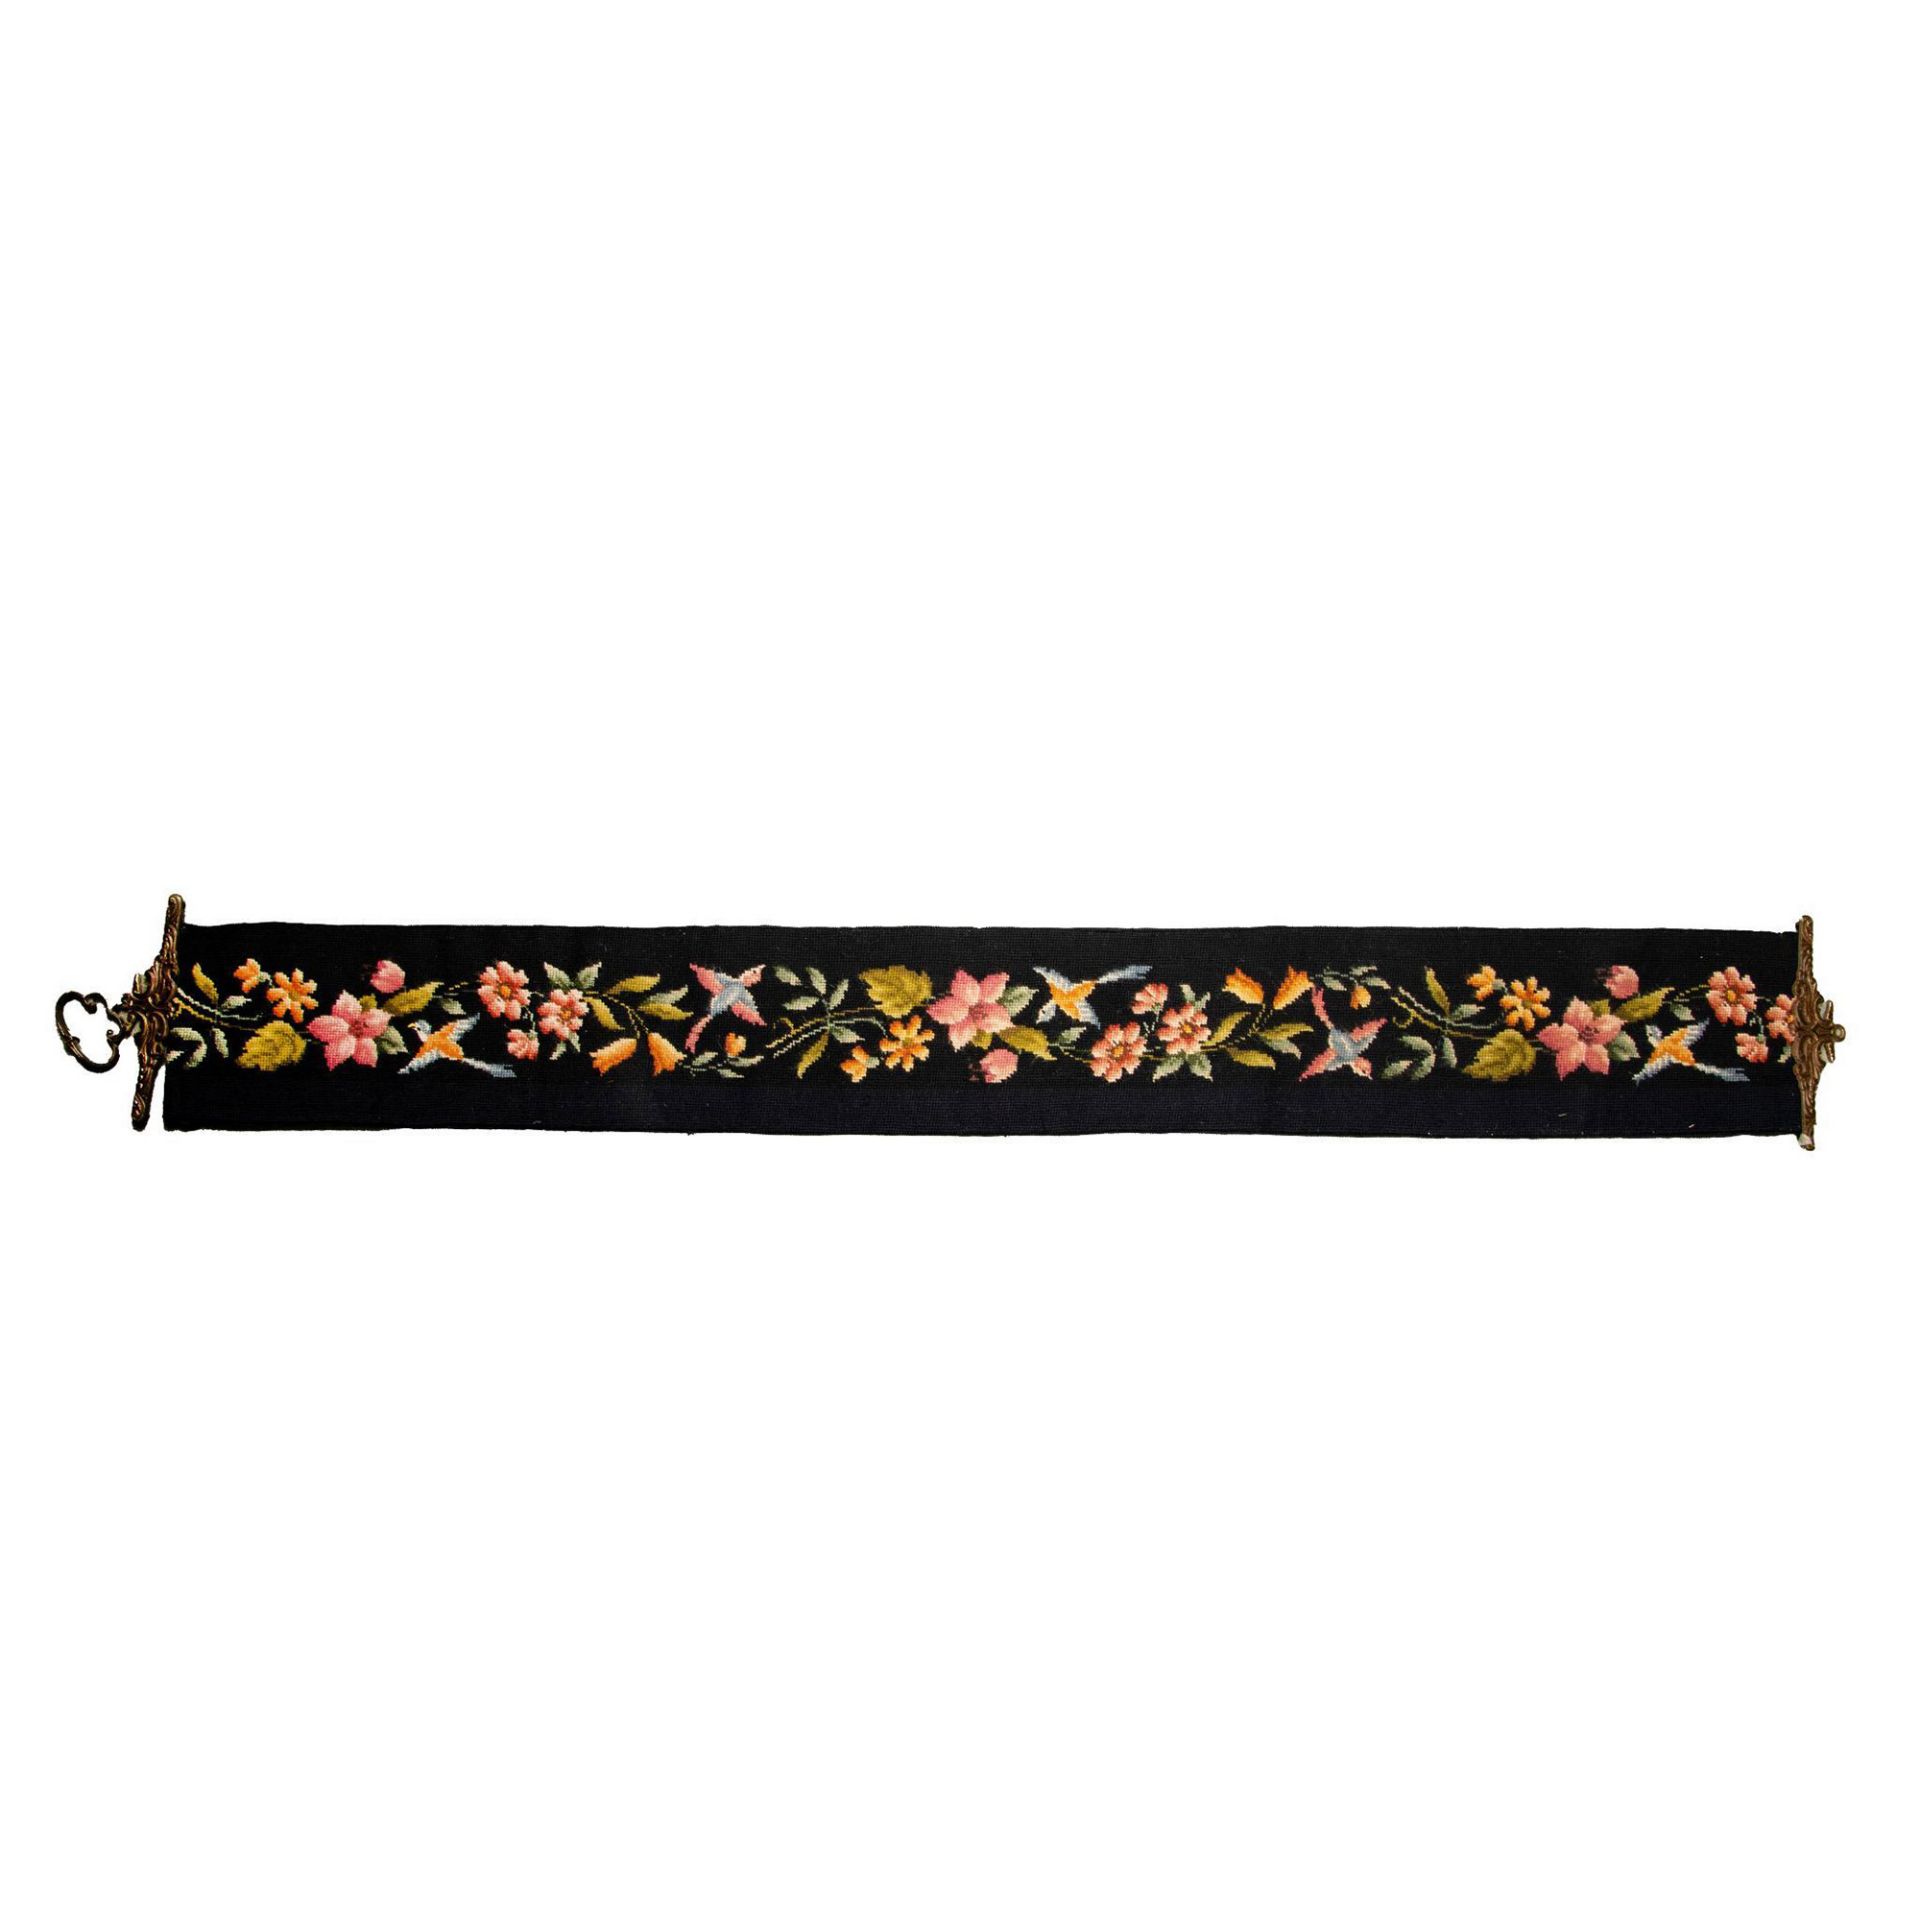 Embroidered Floral Tapestry